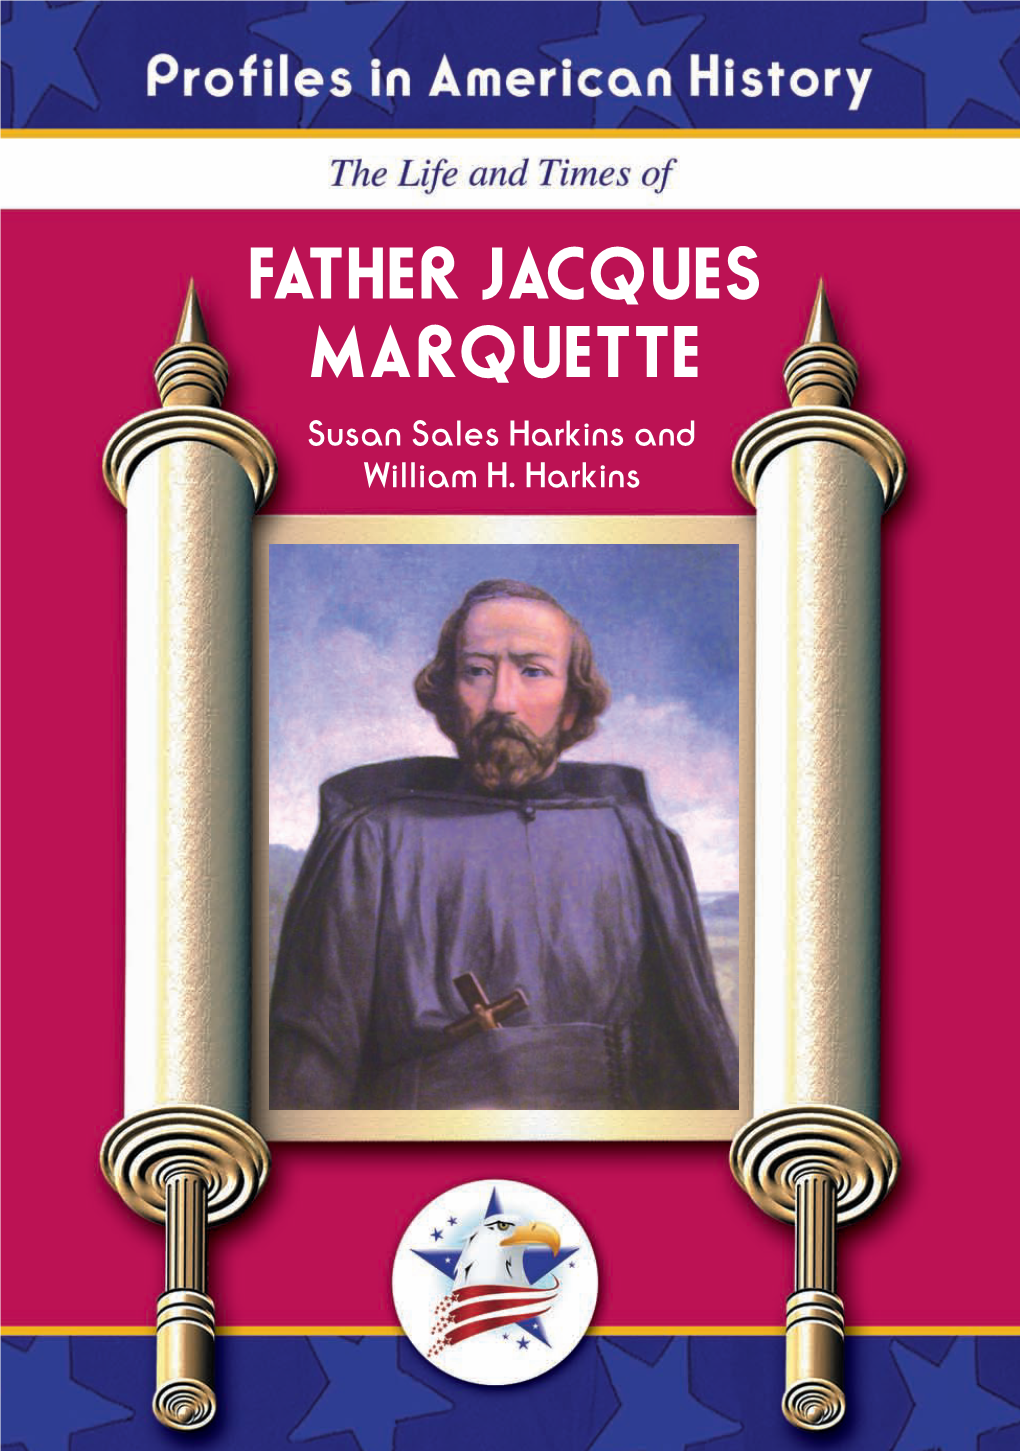 FATHER JACQUES MARQUETTE FATHERJACQUES MARQUETTE Susan Sales Harkins and the Life and Times of William H